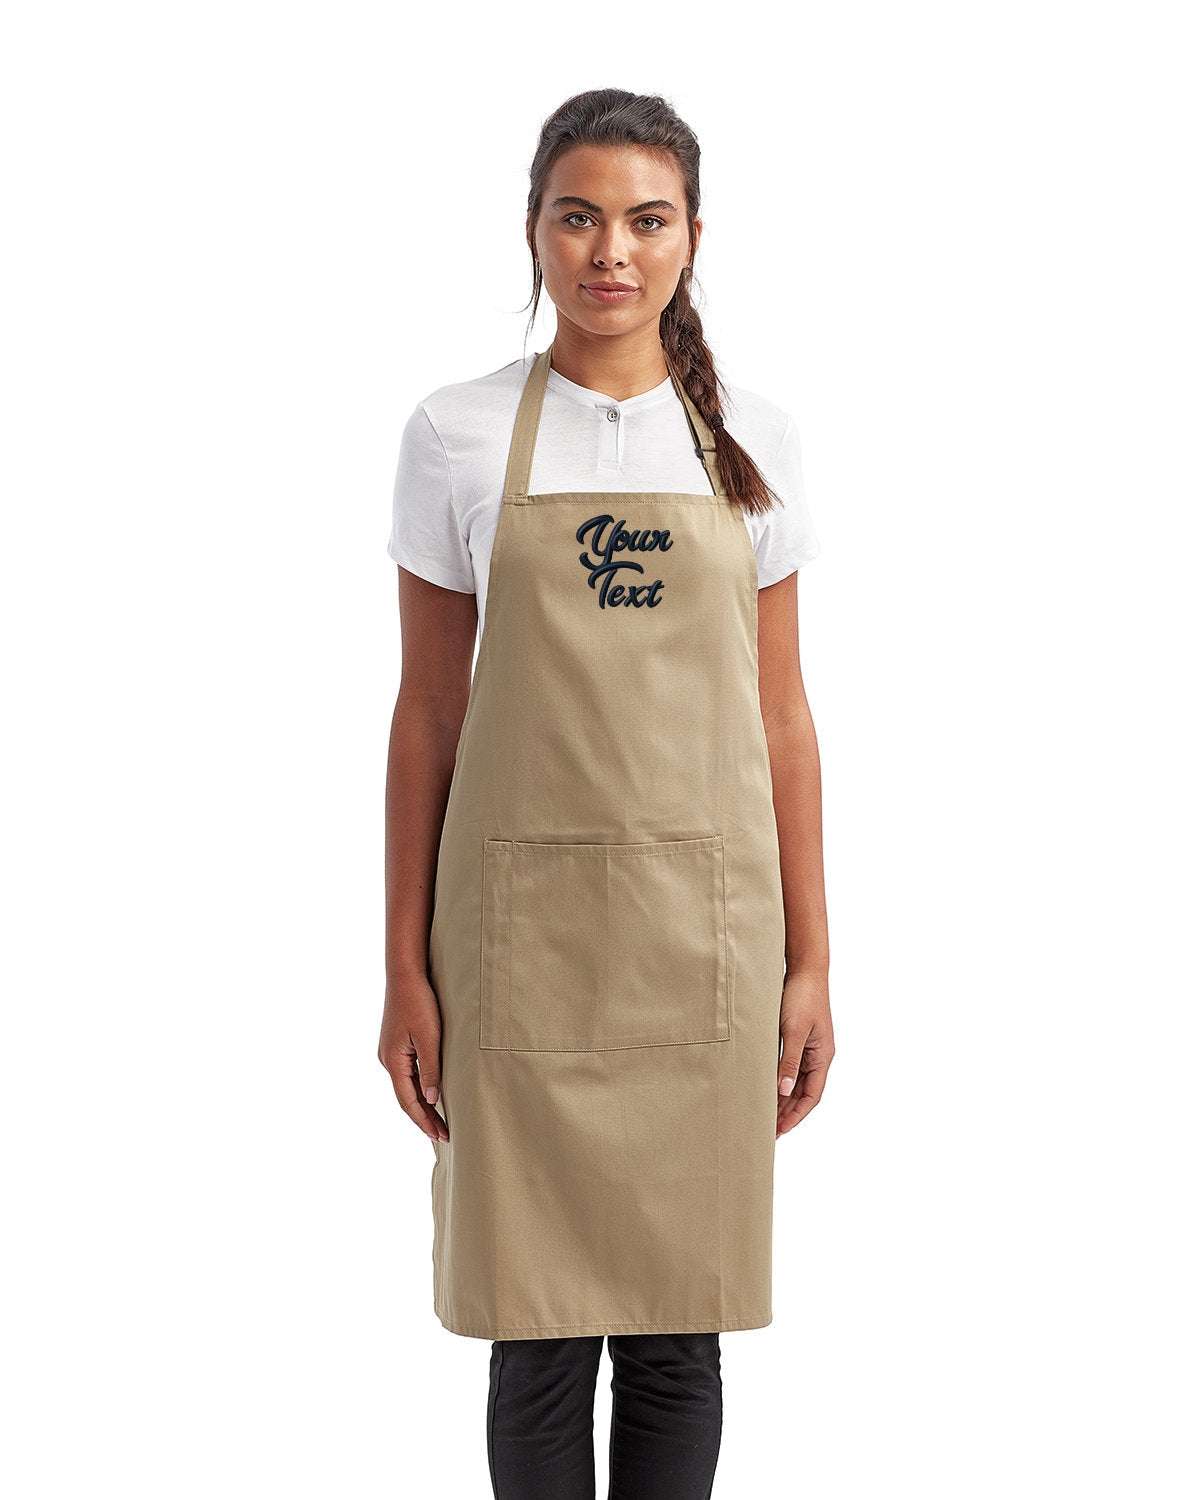 Restaurant Aprons with Your Company Name Embroidered - 3 Pack khaki